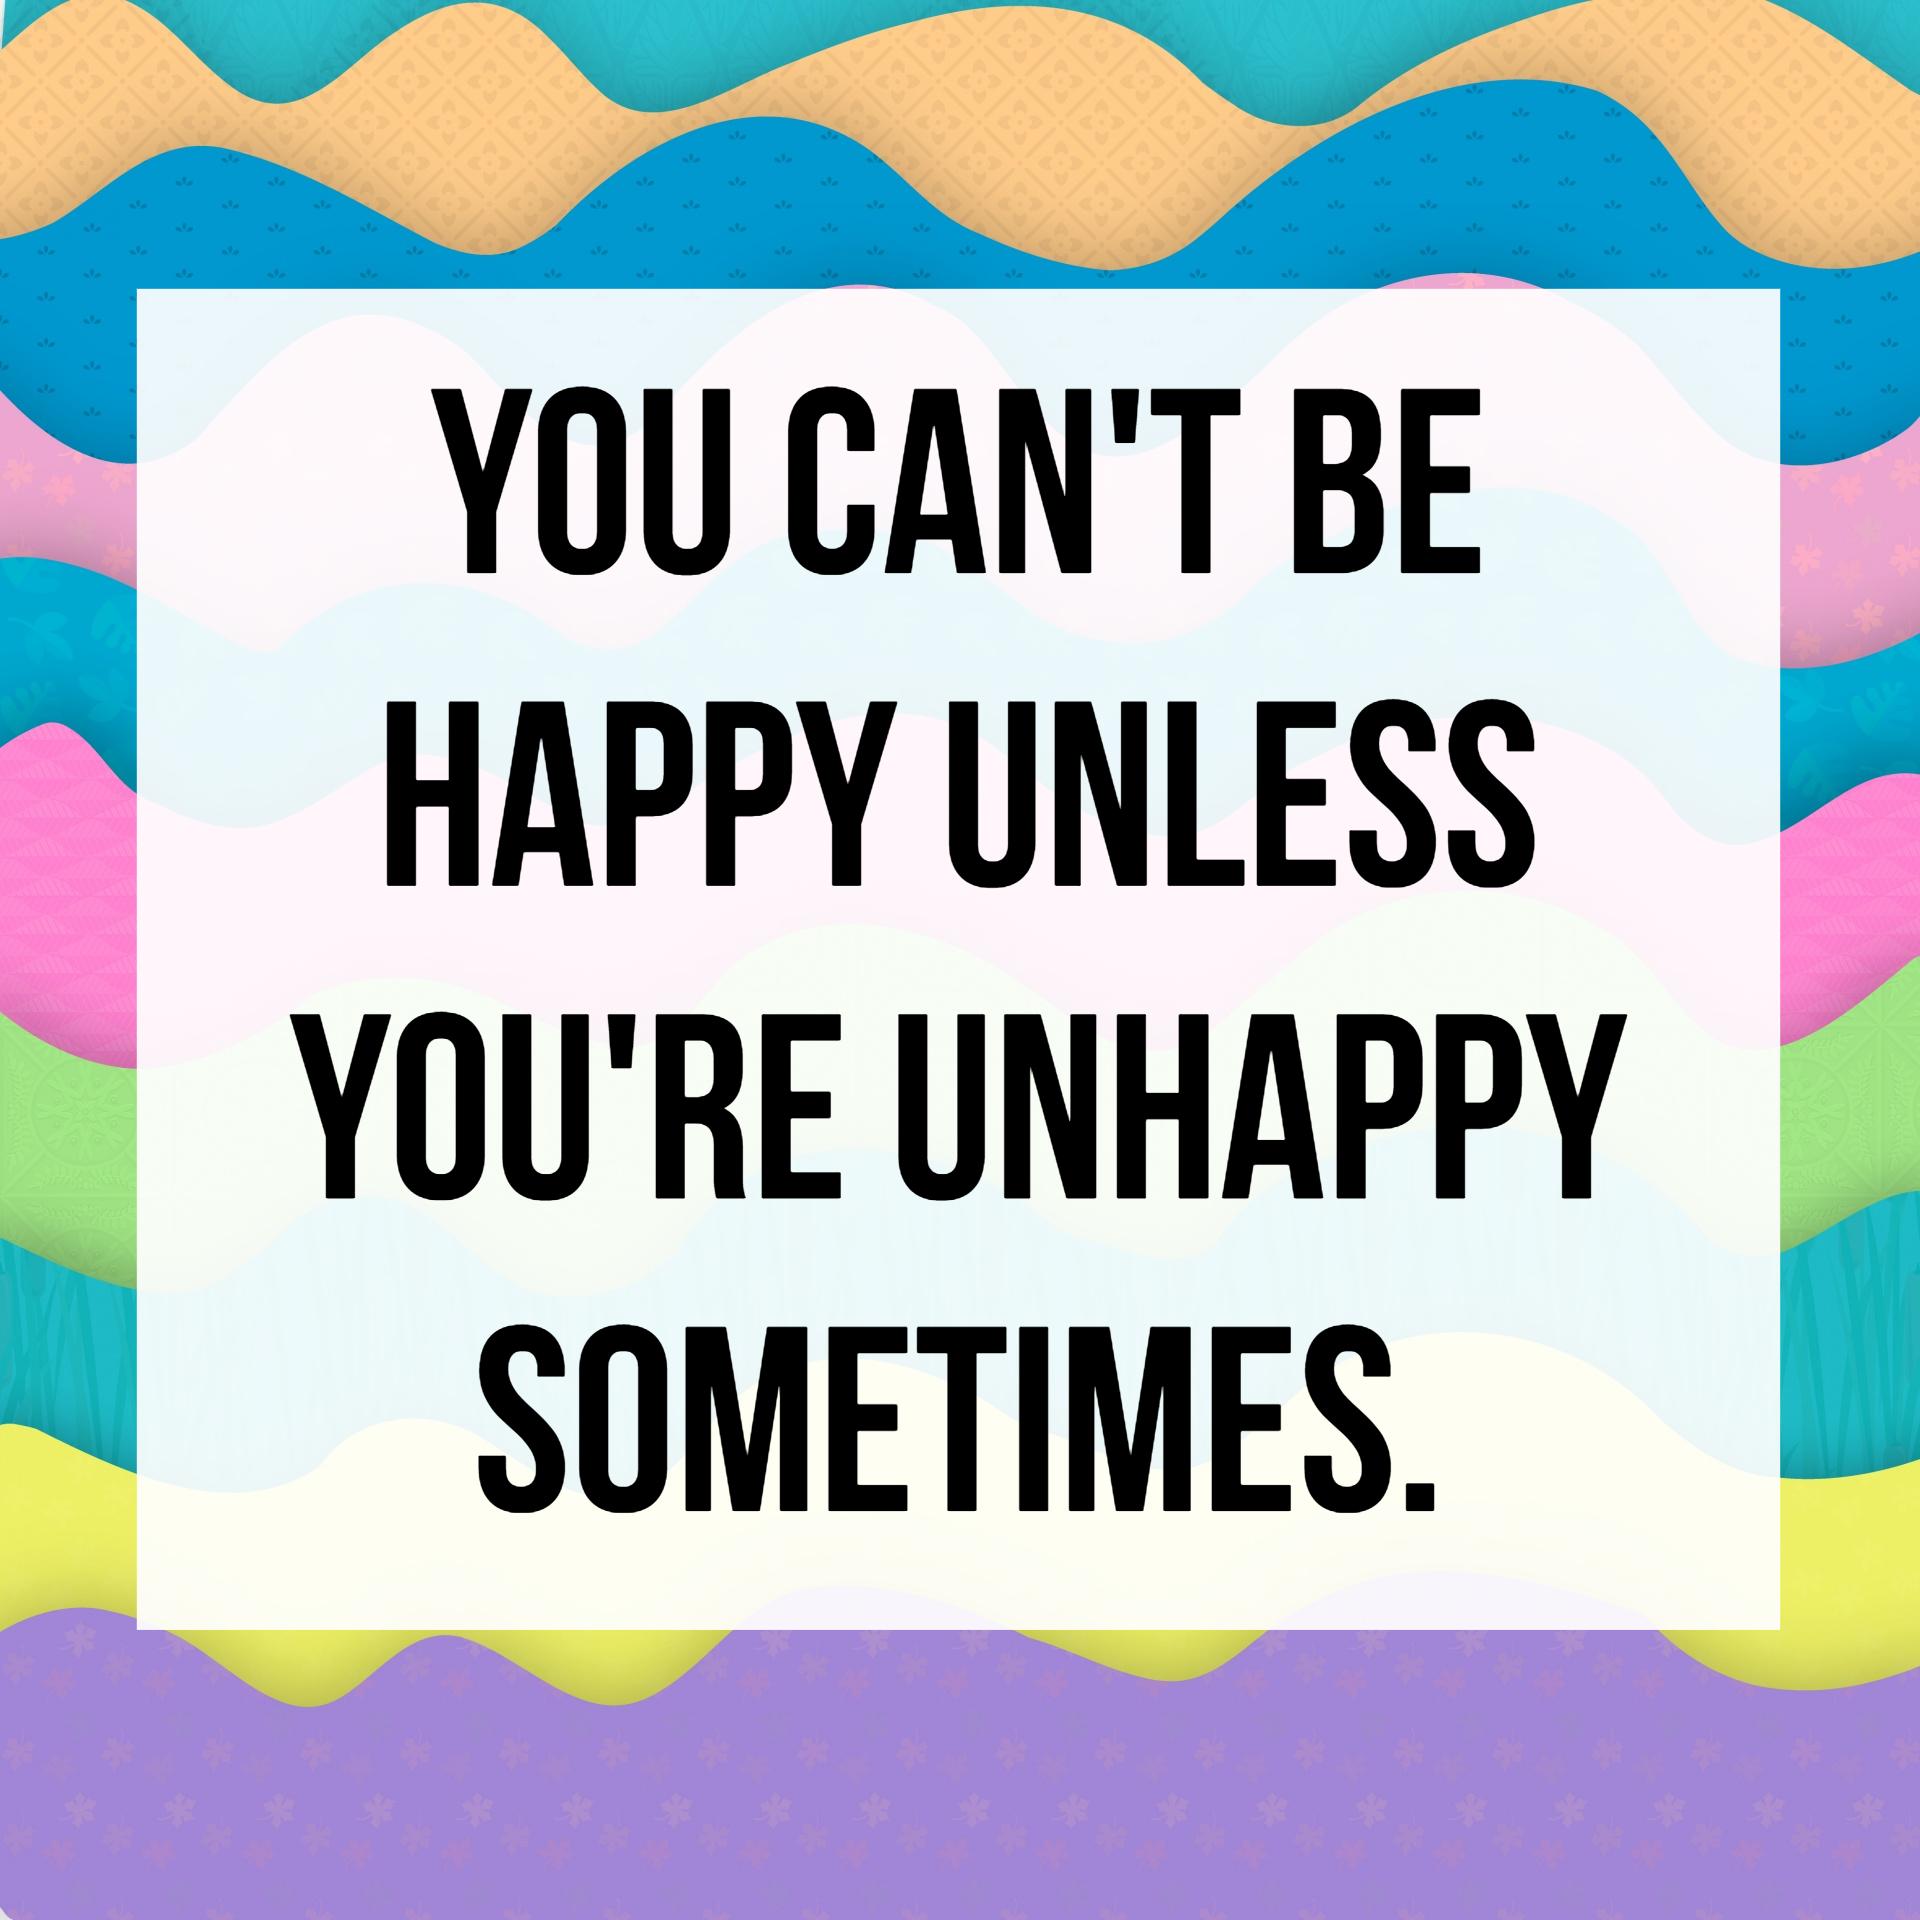 Quotes About Happiness 6 | QuoteReel